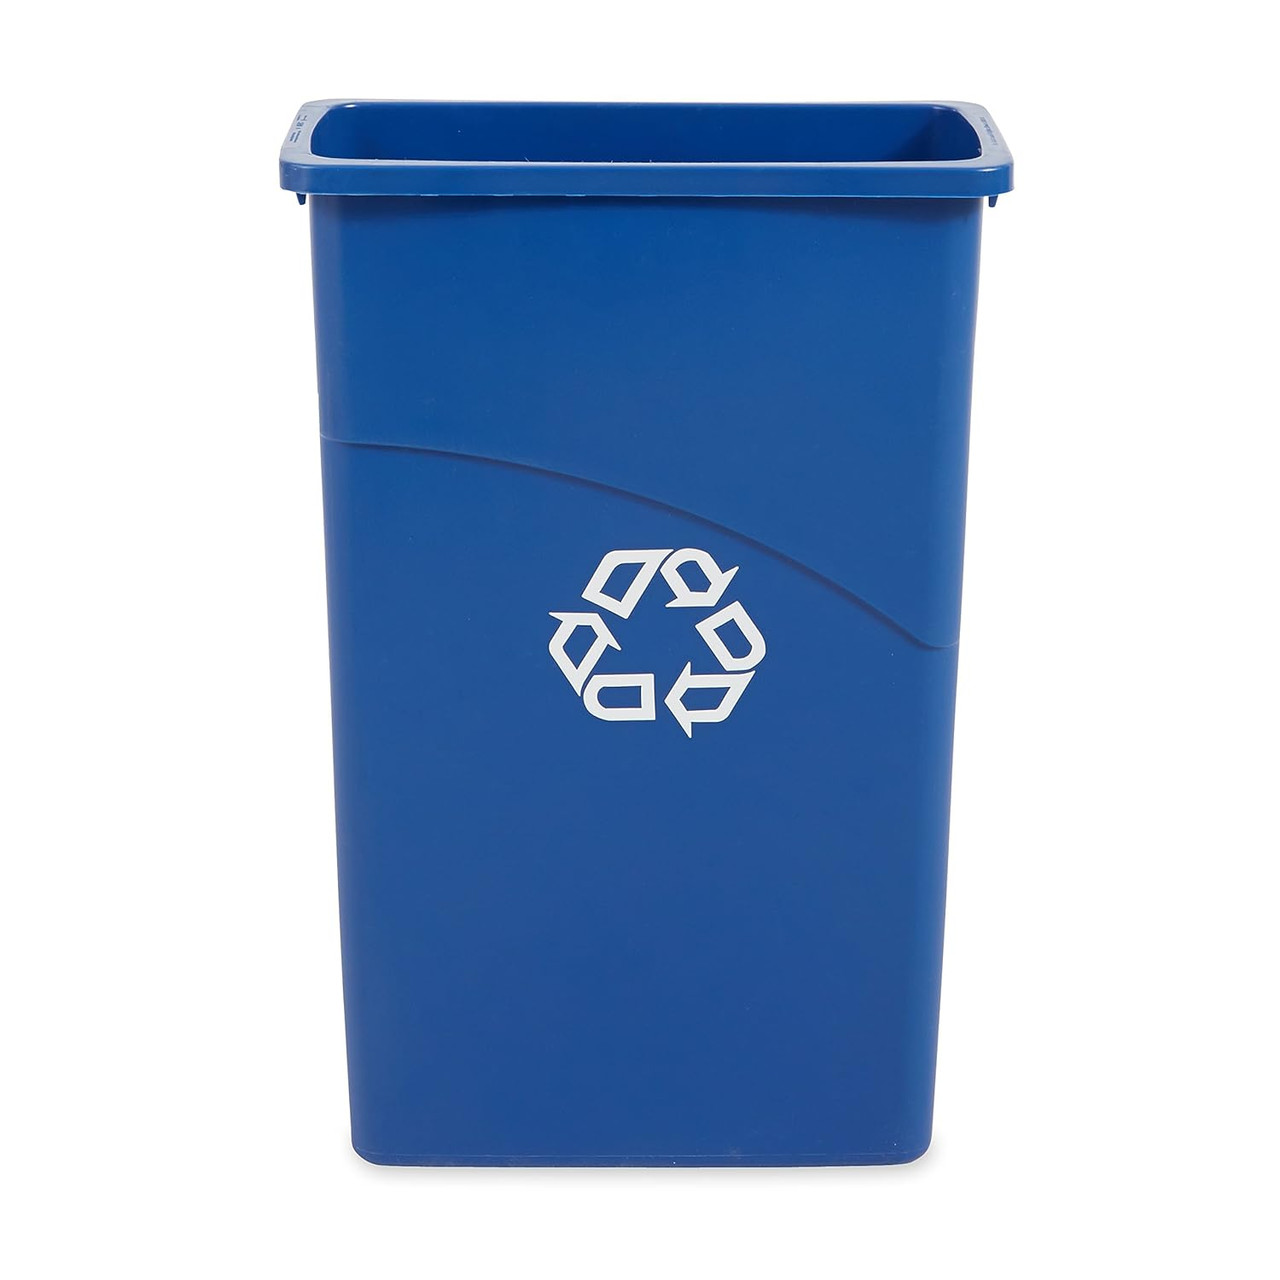 Rubbermaid Slim Jim Recycling Container (Old Style) - FG354075BLUE - 87 Ltr - Blue